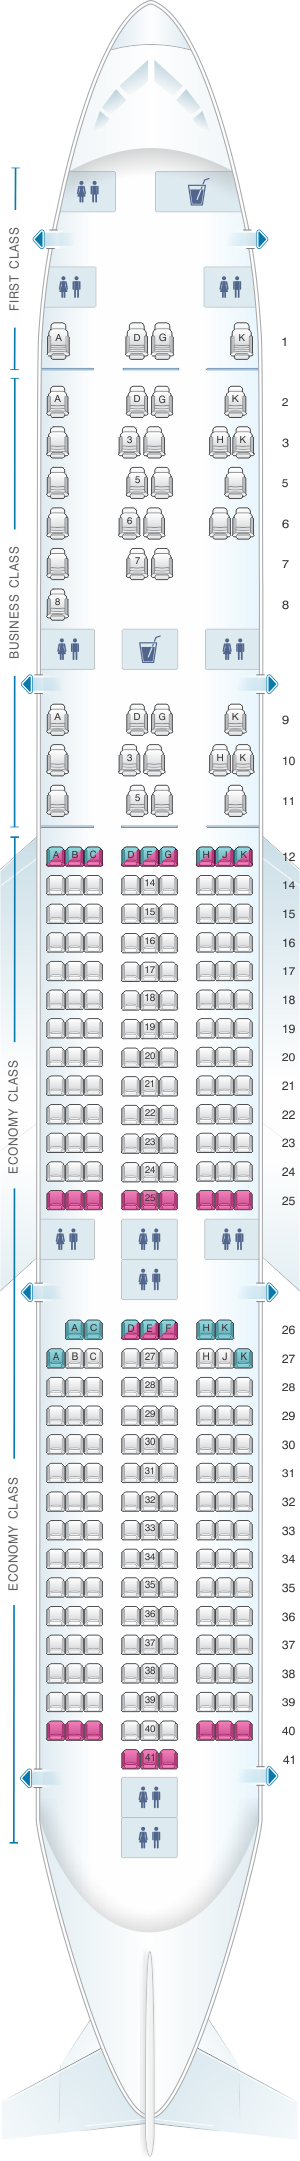 a350 900 seating chart        <h3 class=